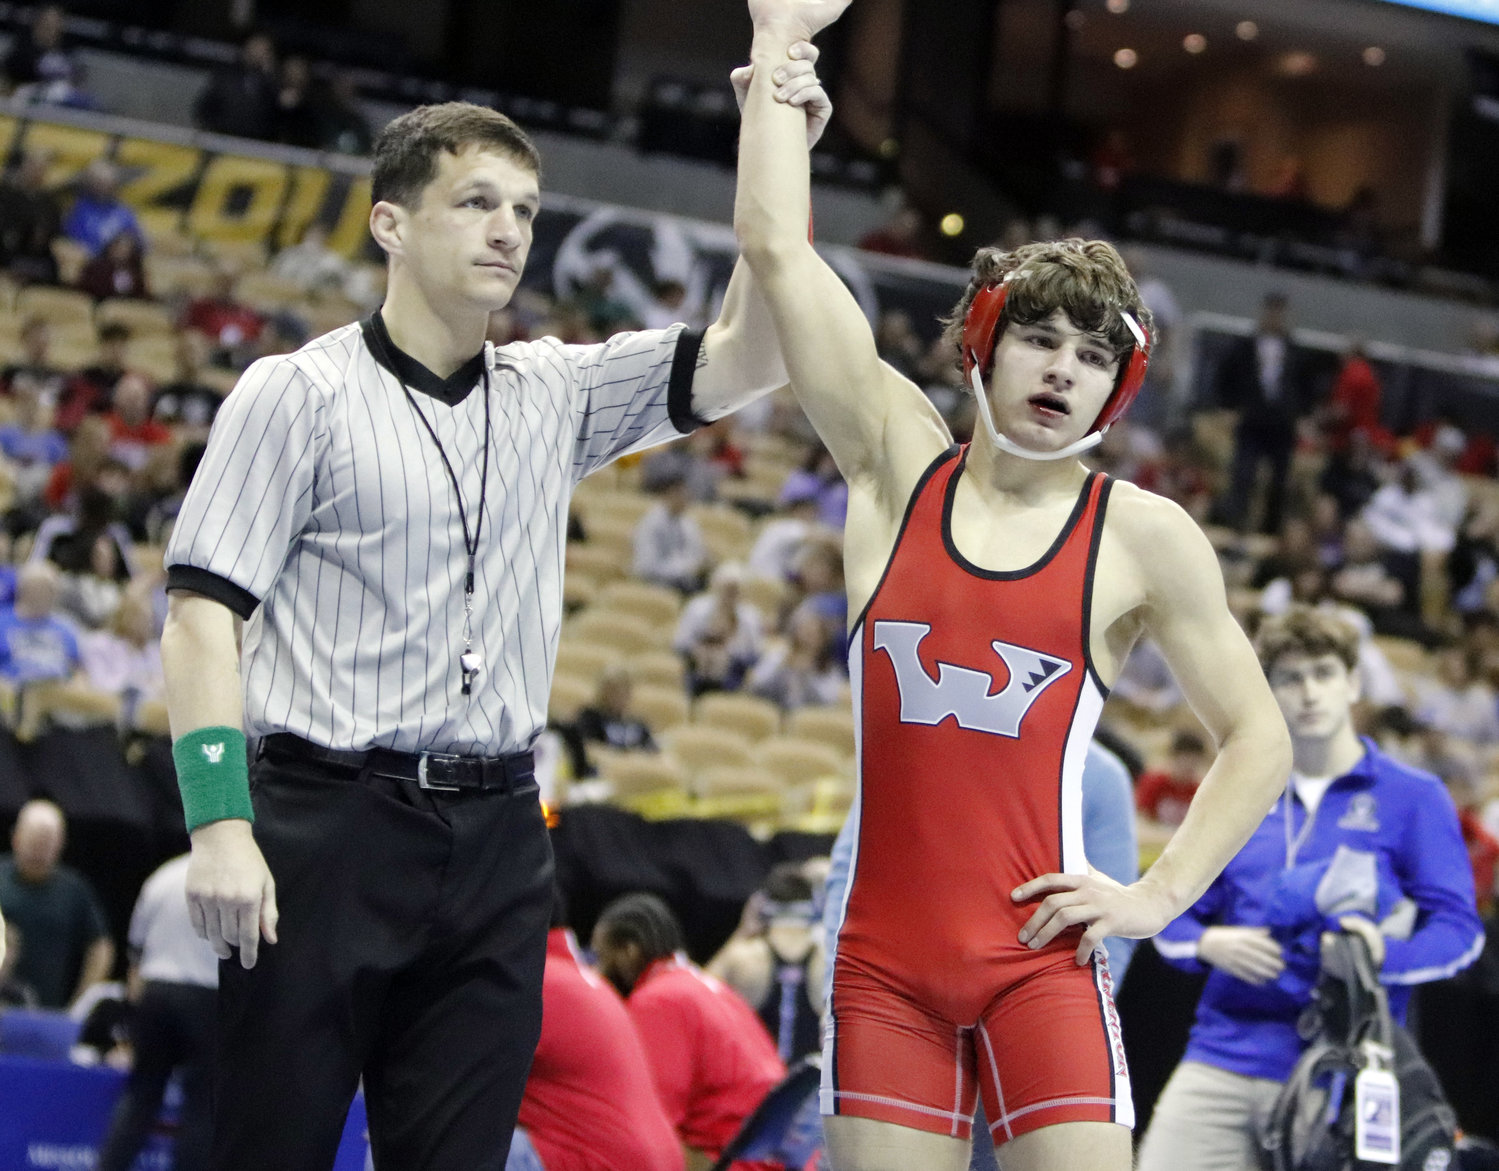 Noah Lohrmann's arm is raised after winning his first round match at the Class 3 state wrestlnig tournament.